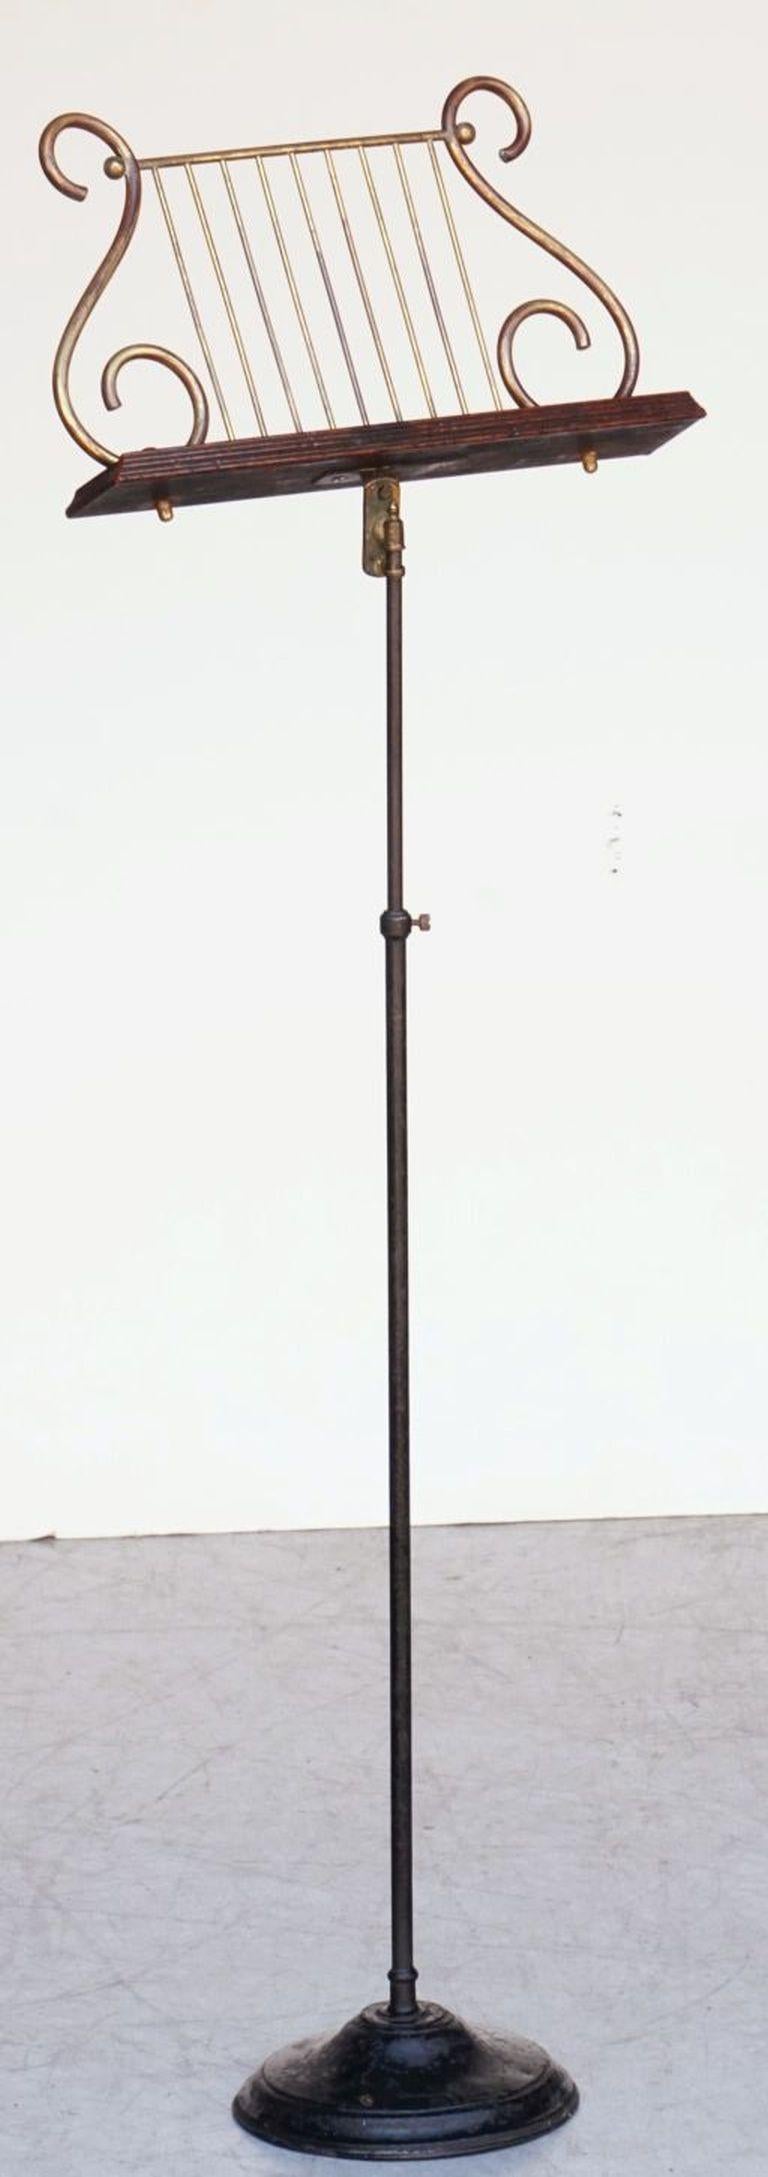 English Adjustable Lyre-Shaped Music Stand from the Edwardian Era For Sale 4